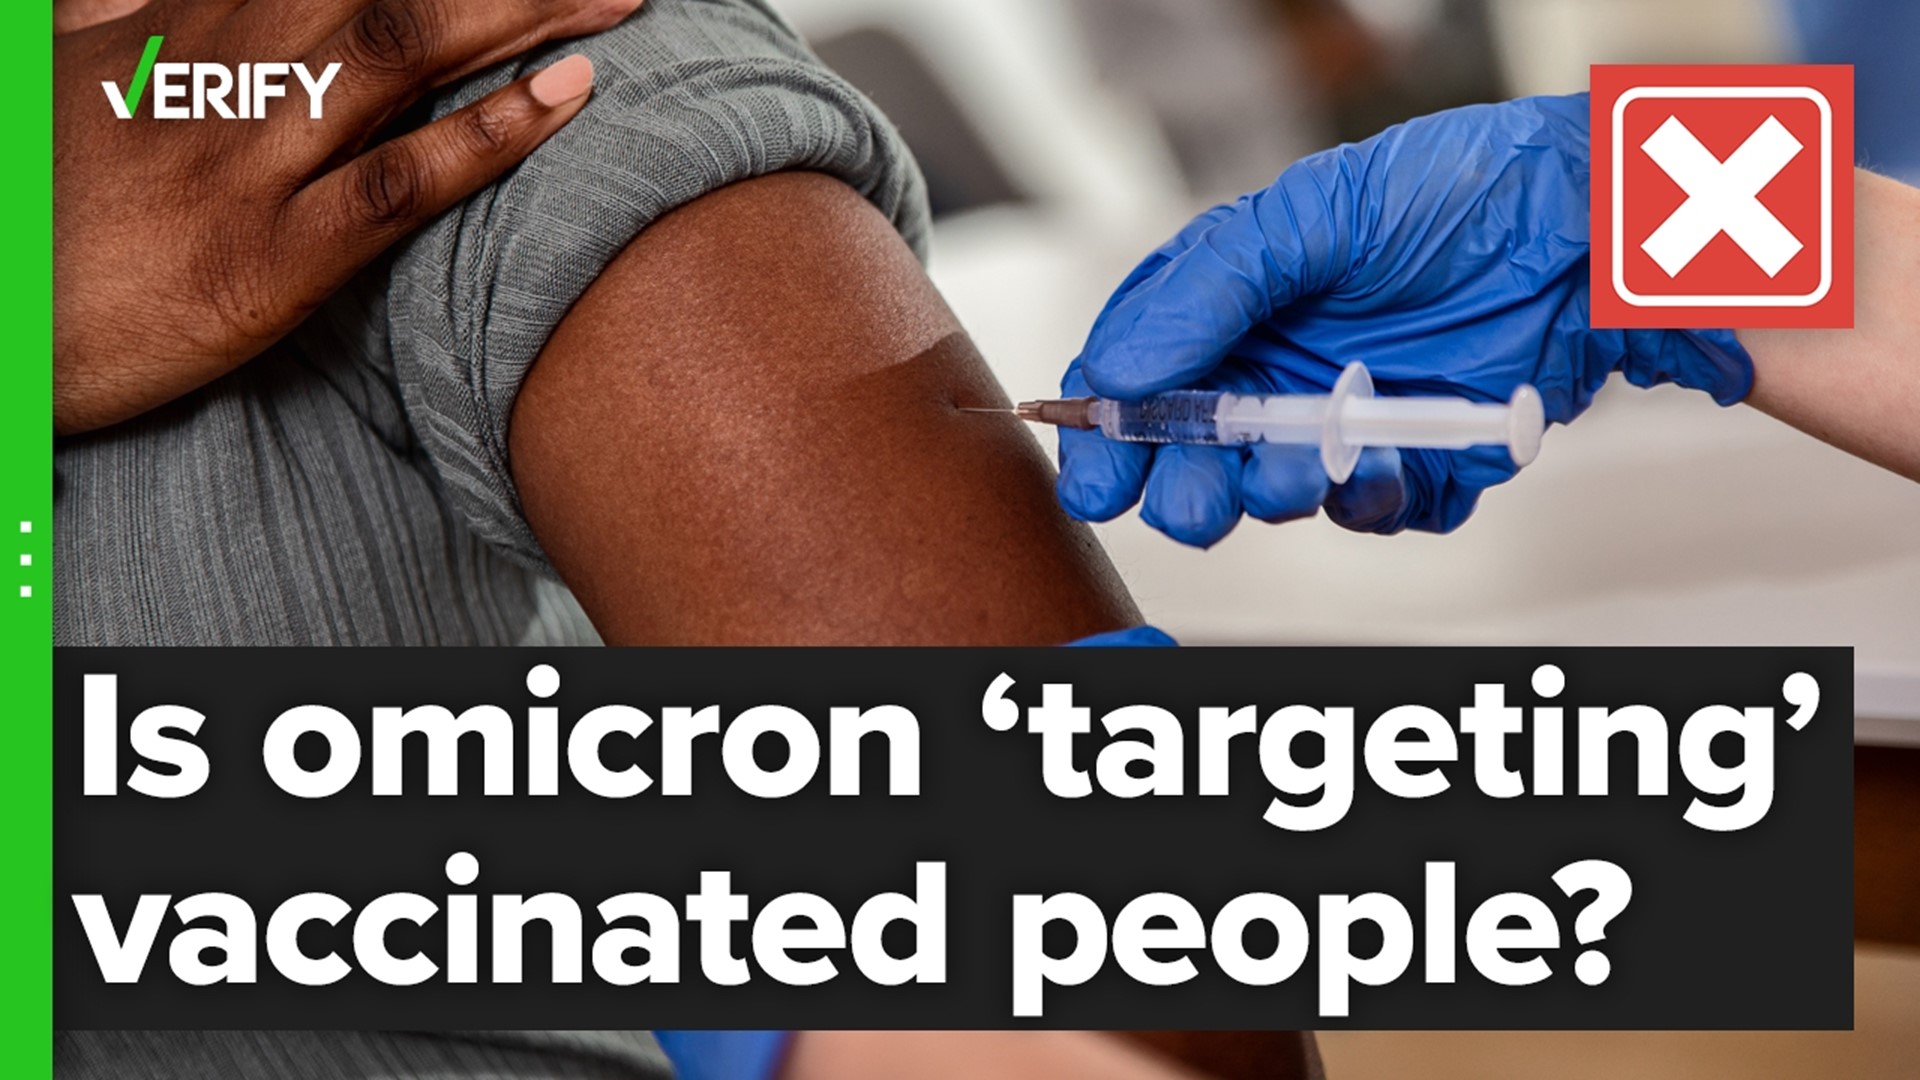 A virus cannot target a specific person regardless of vaccination status. "Immune evasion," along with increased transmissibility, are reasons why omicron spreads.